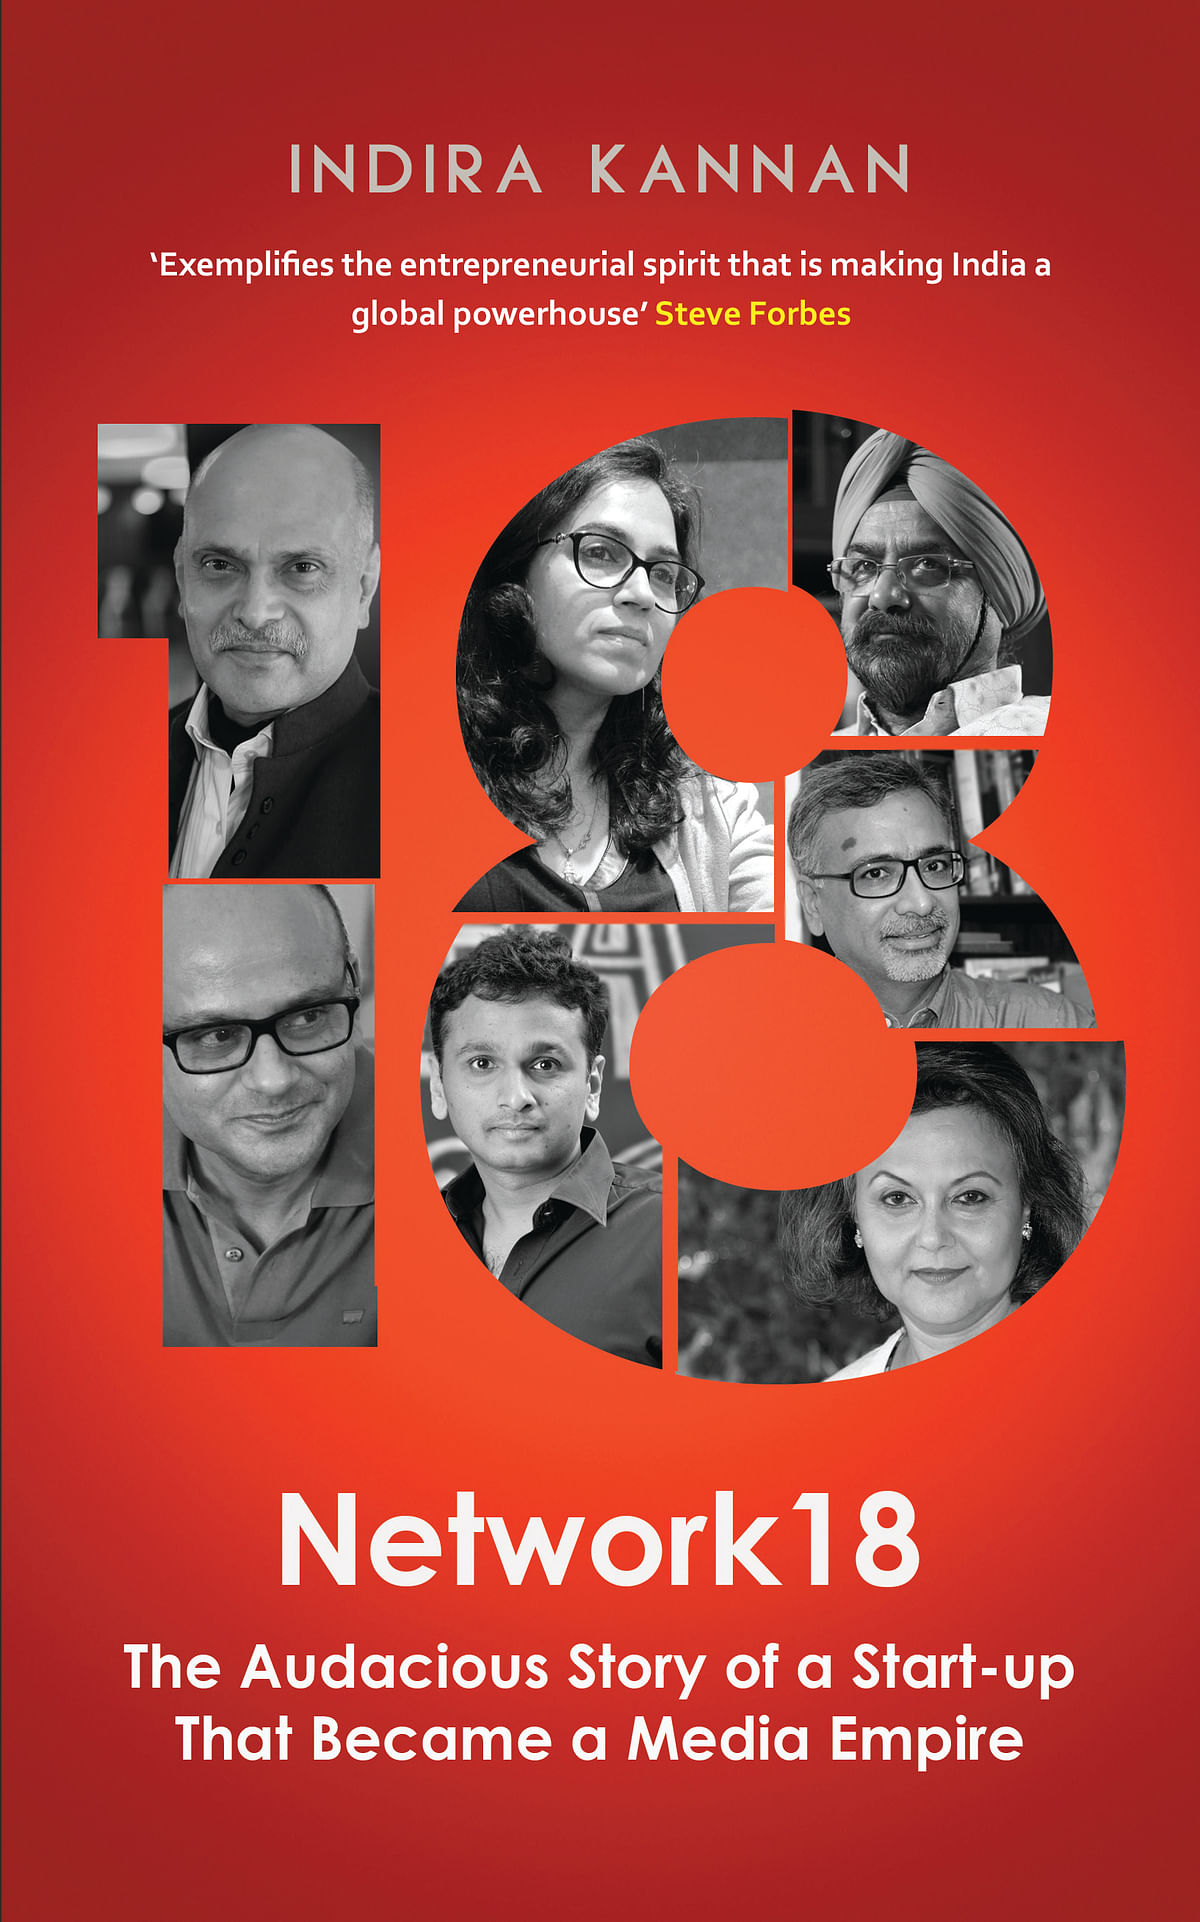 Indira Kannan has penned the journey of Network-18 from a start-up to a media empire